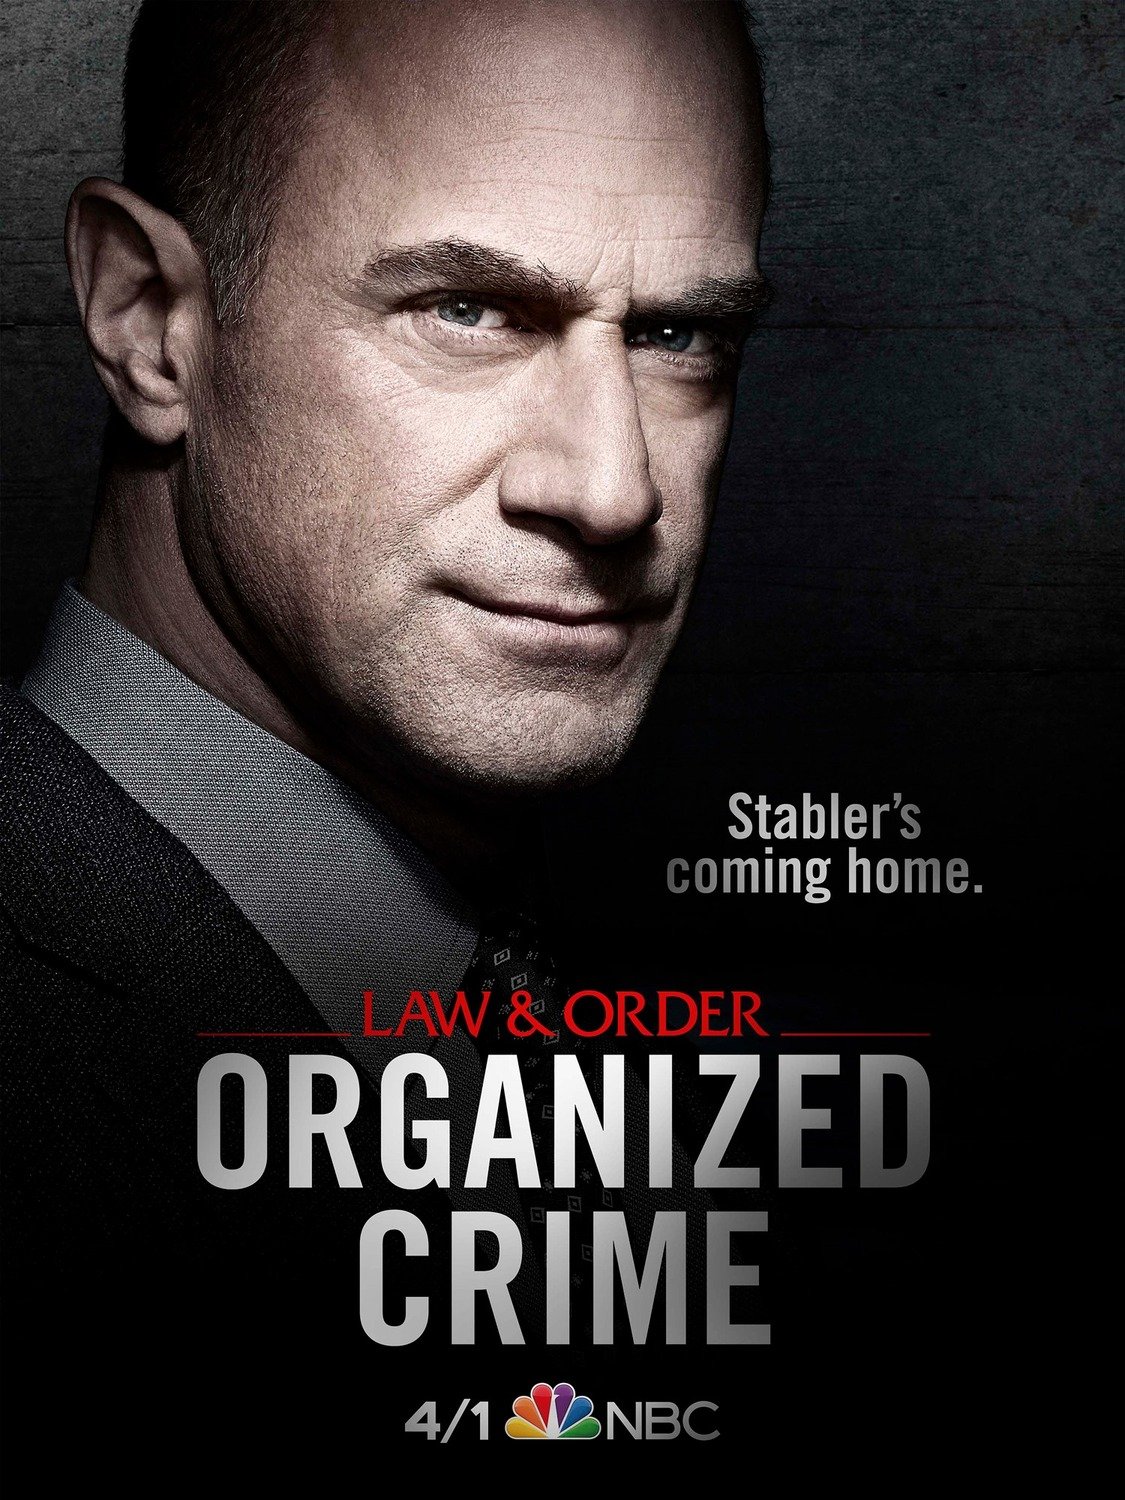 law_and_order_organized_crime_xlg.jpg